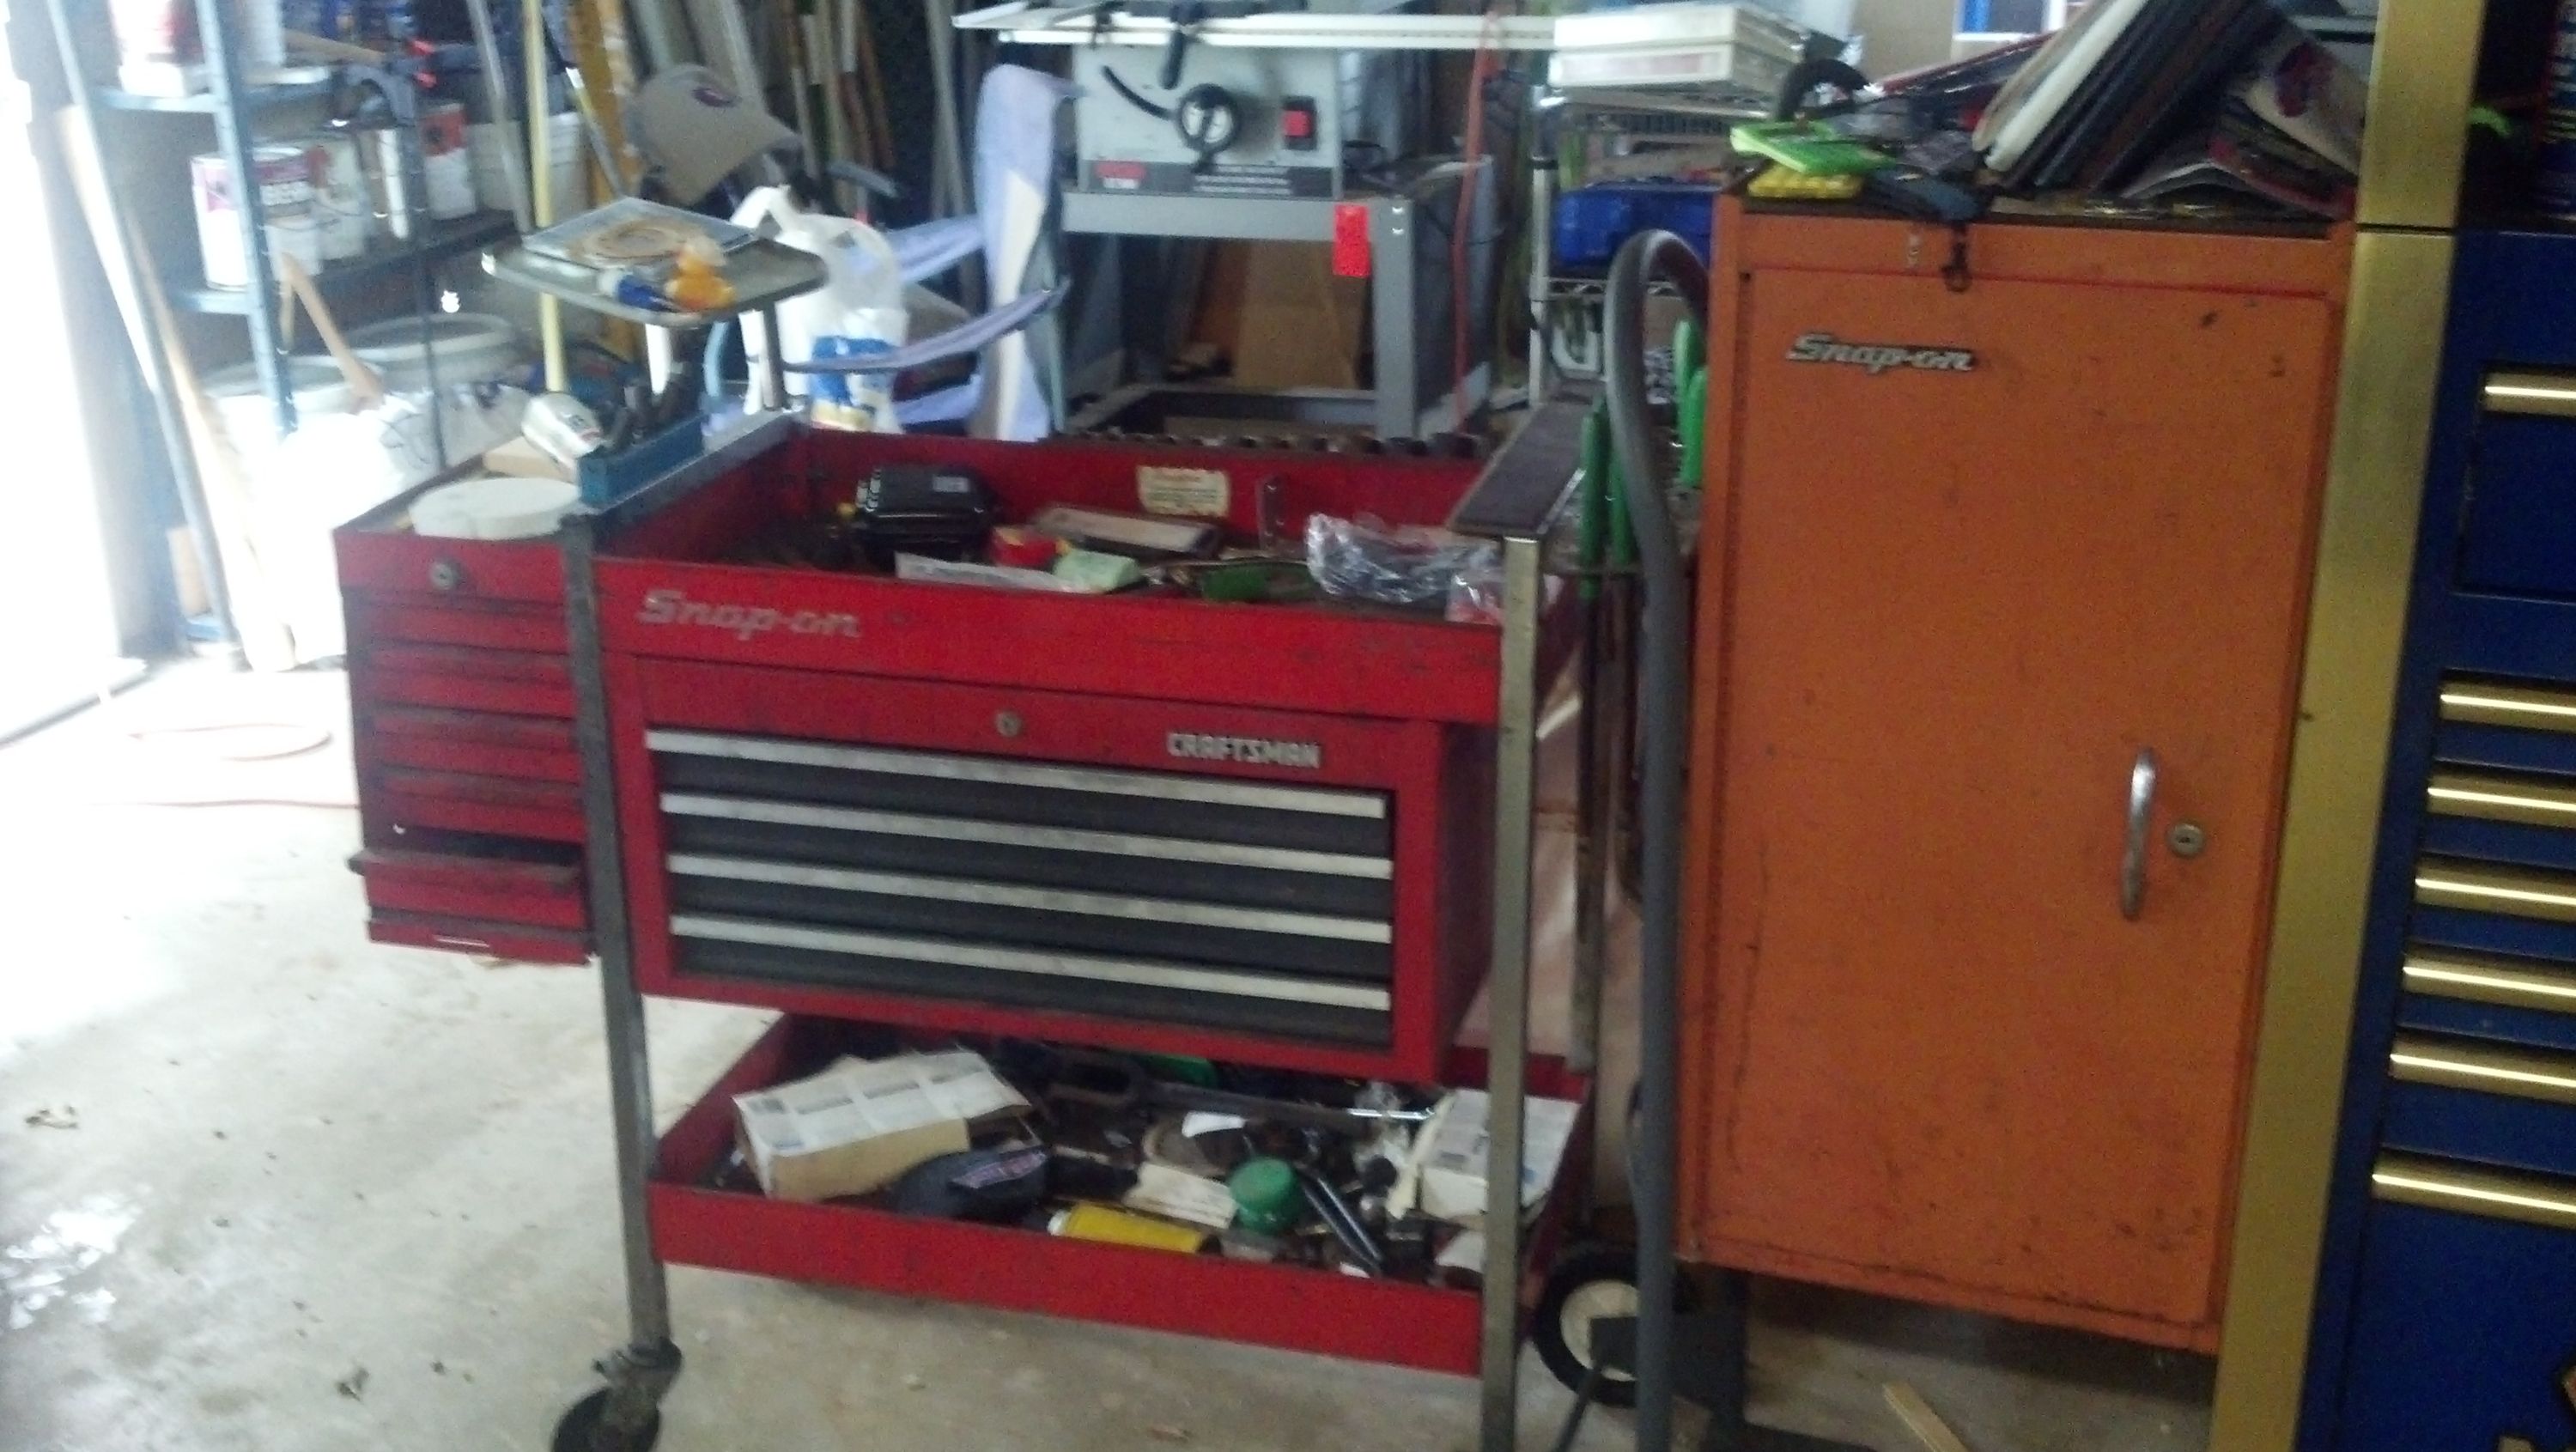 Tool cart and side boxes